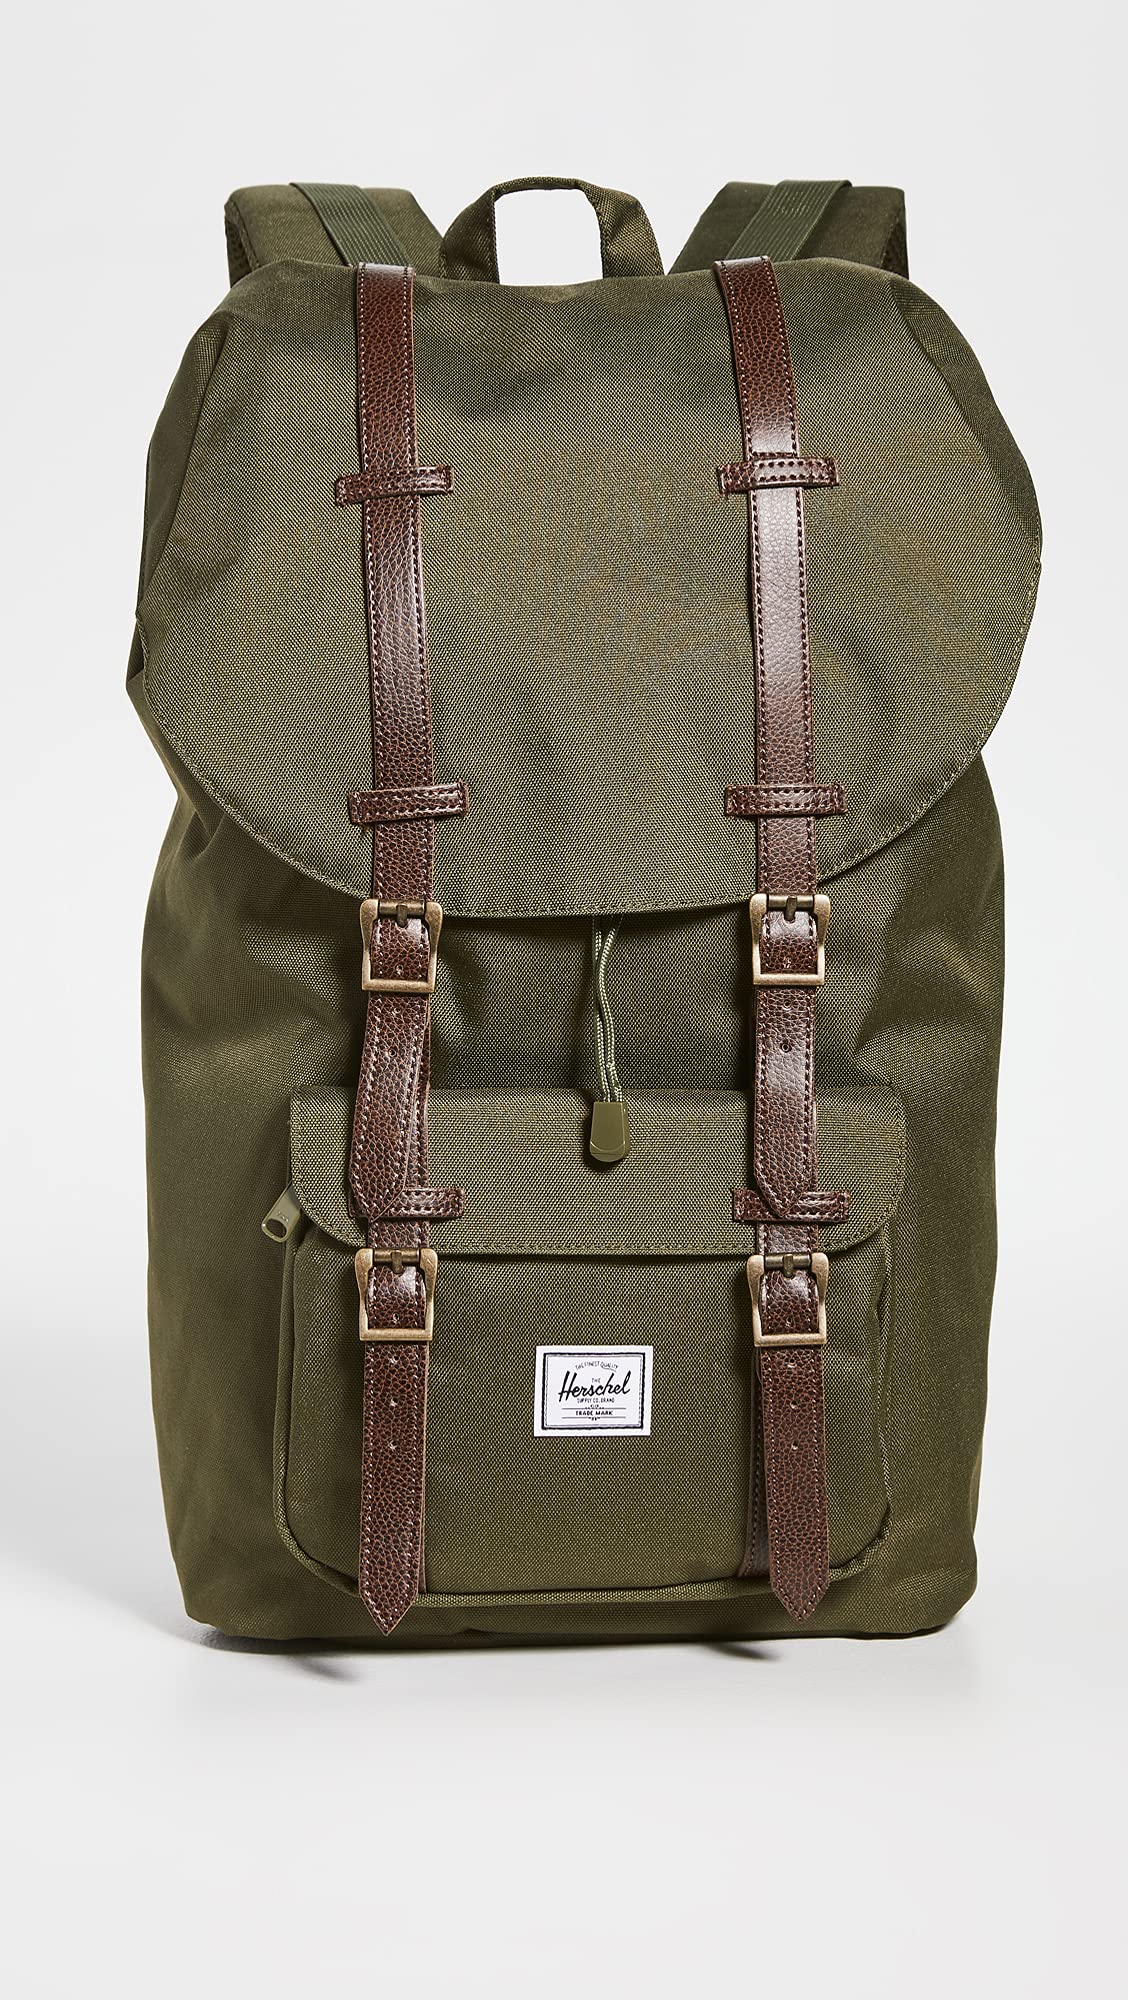 Herschel Little America Laptop Backpack, Ivy Green/Chicory Coffee, Classic 25.0L